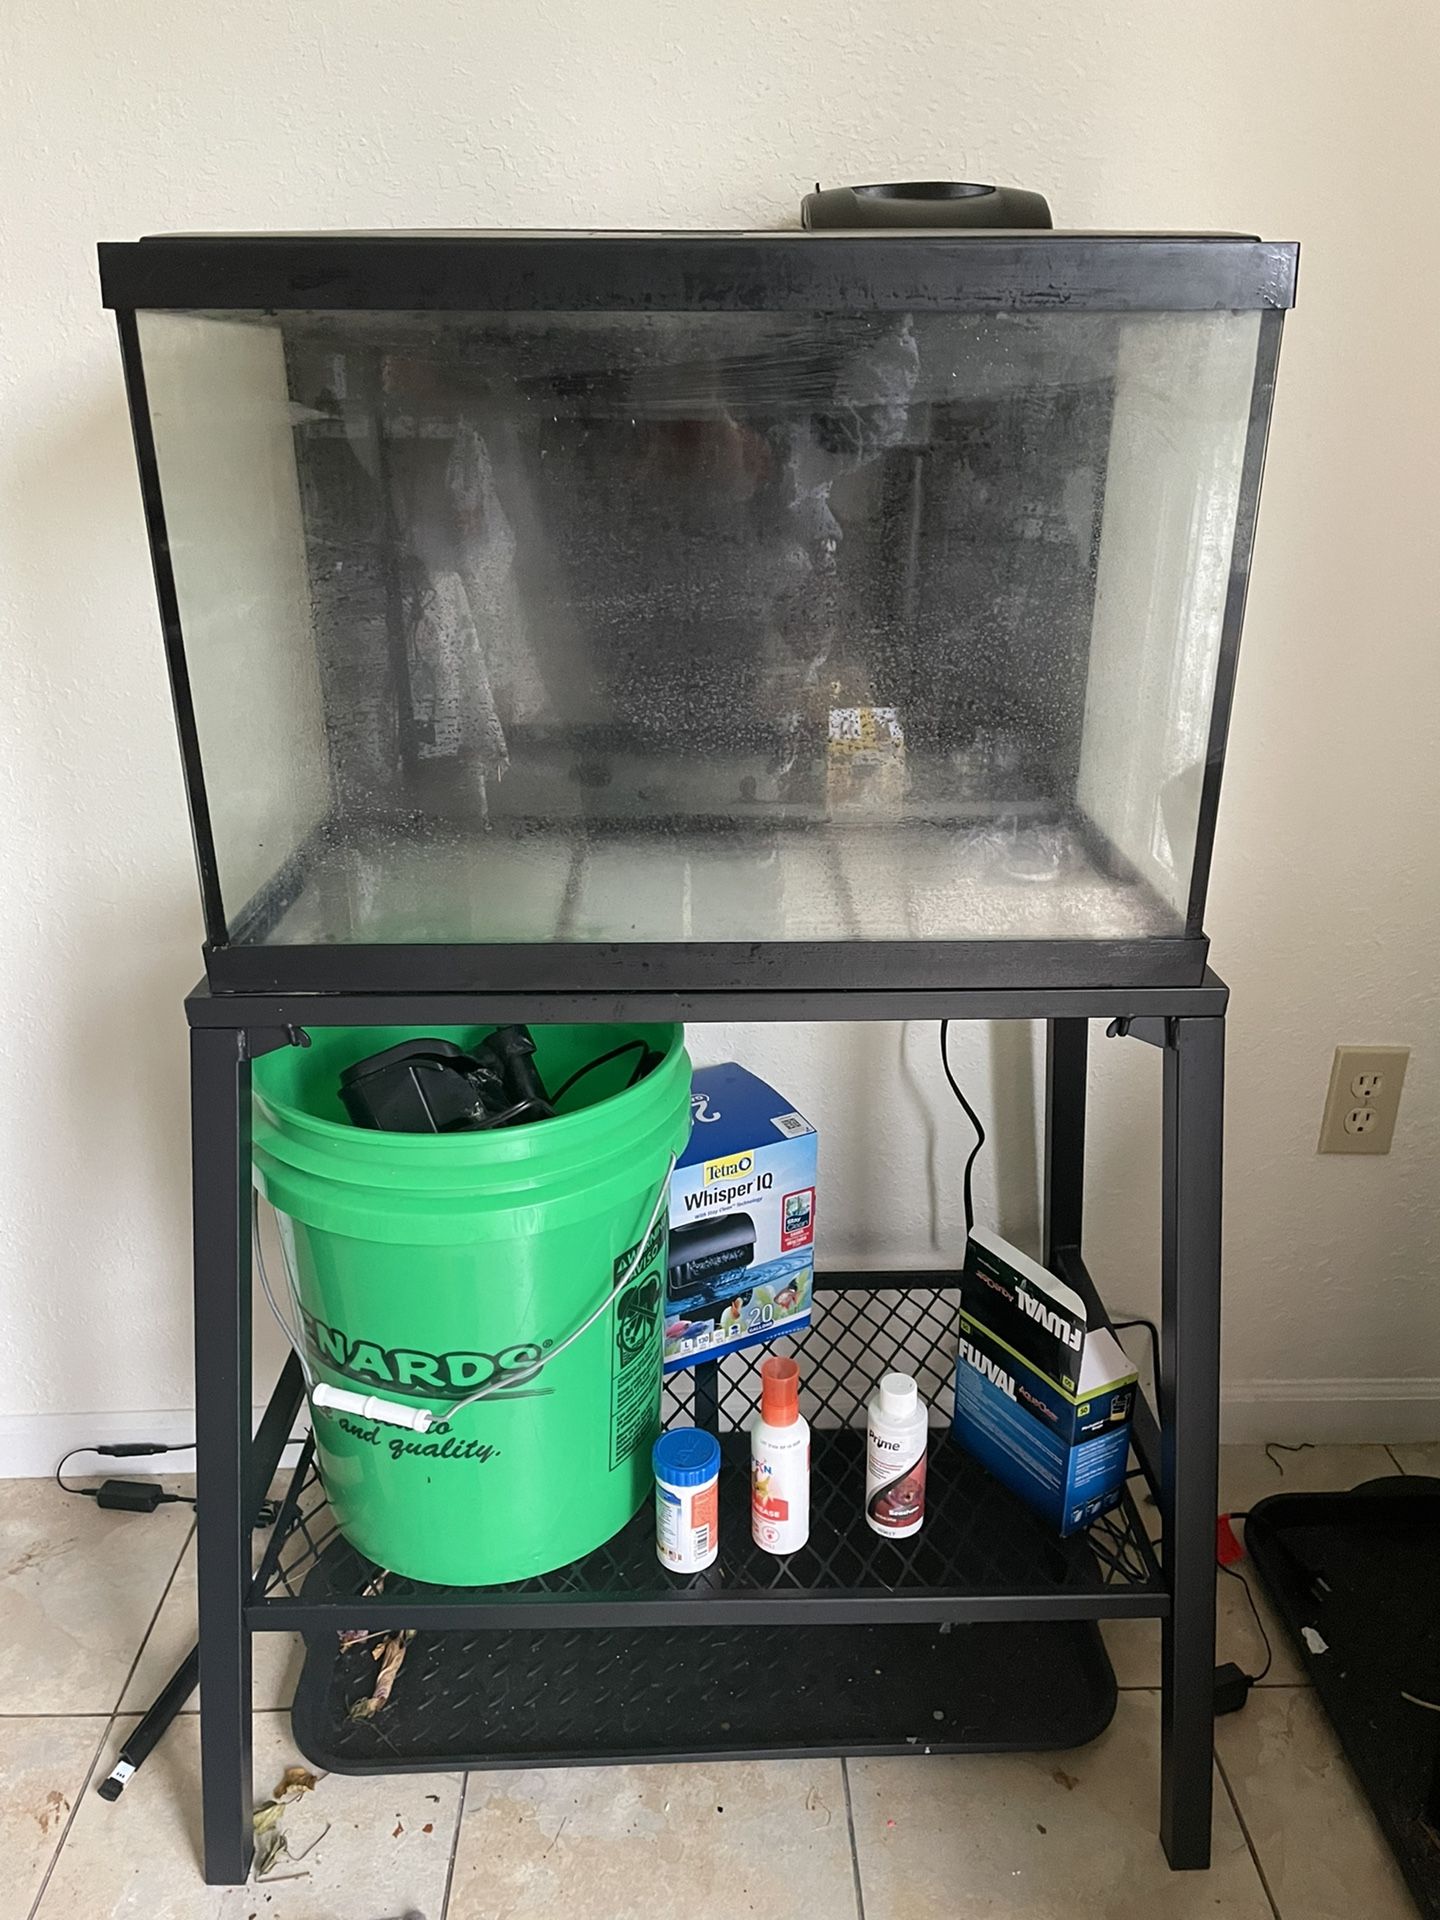 Fish Tank With Accessories 